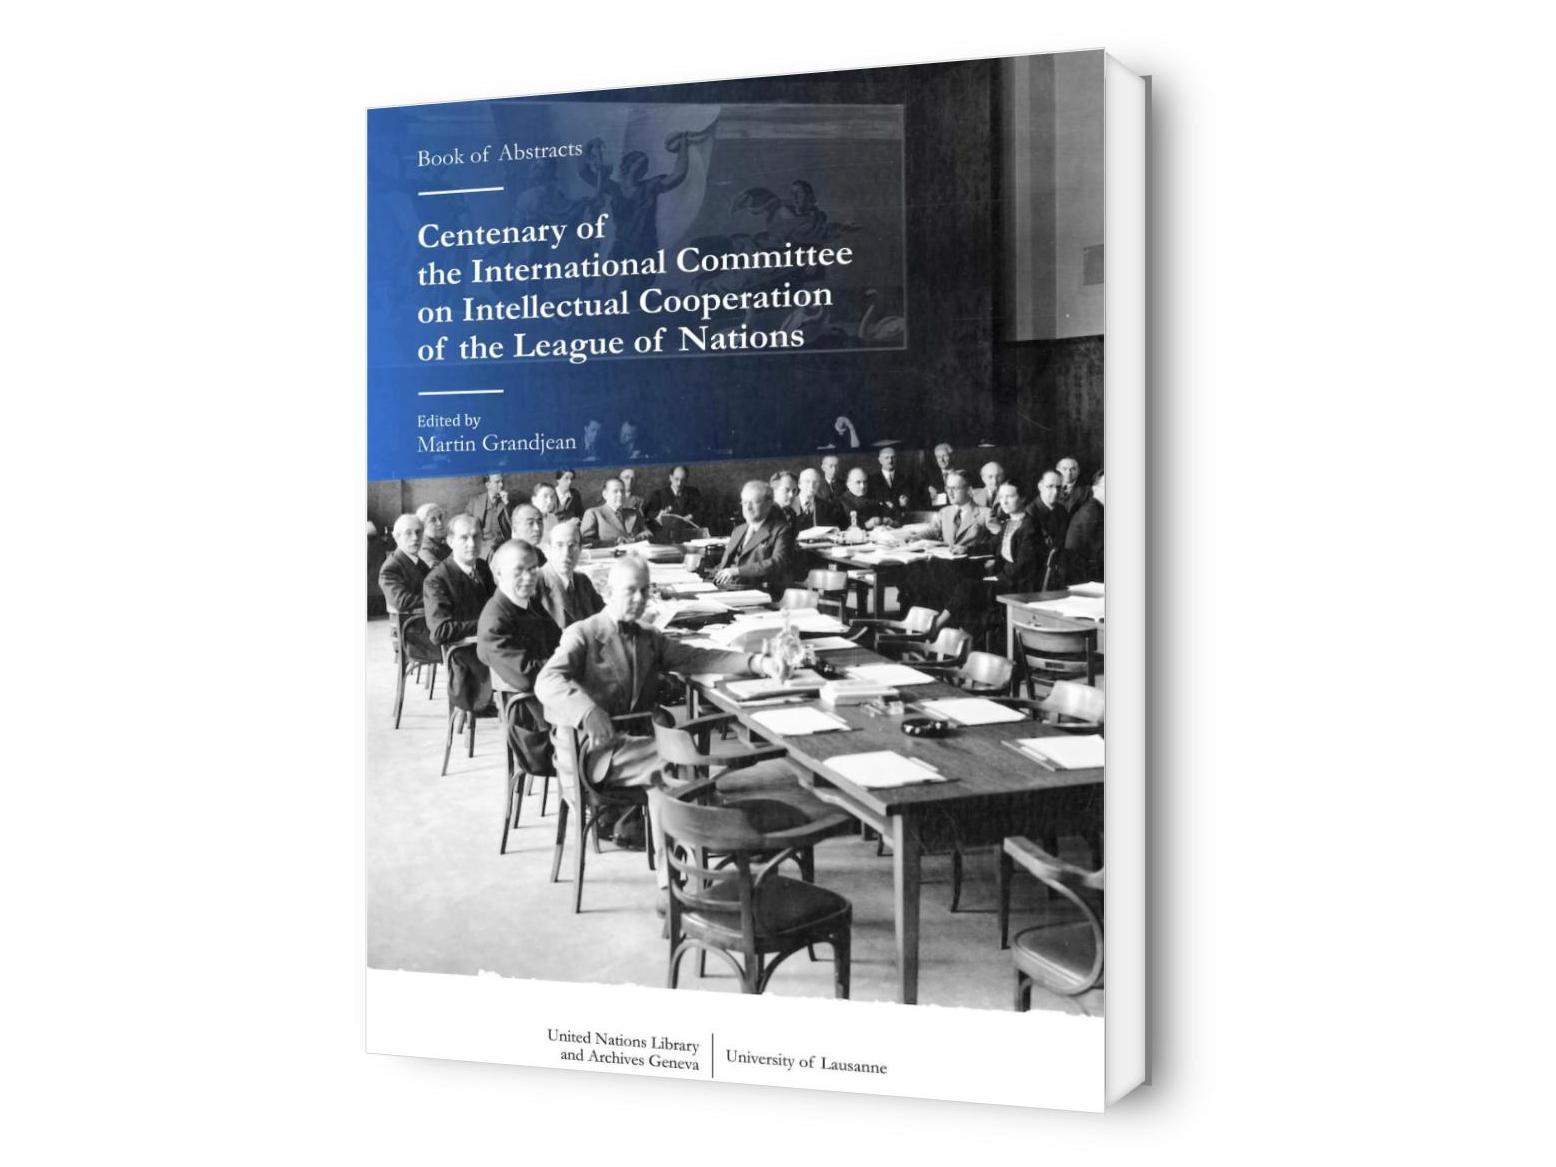 Centenary of the International Committee on Intellectual Cooperation of the League of Nations